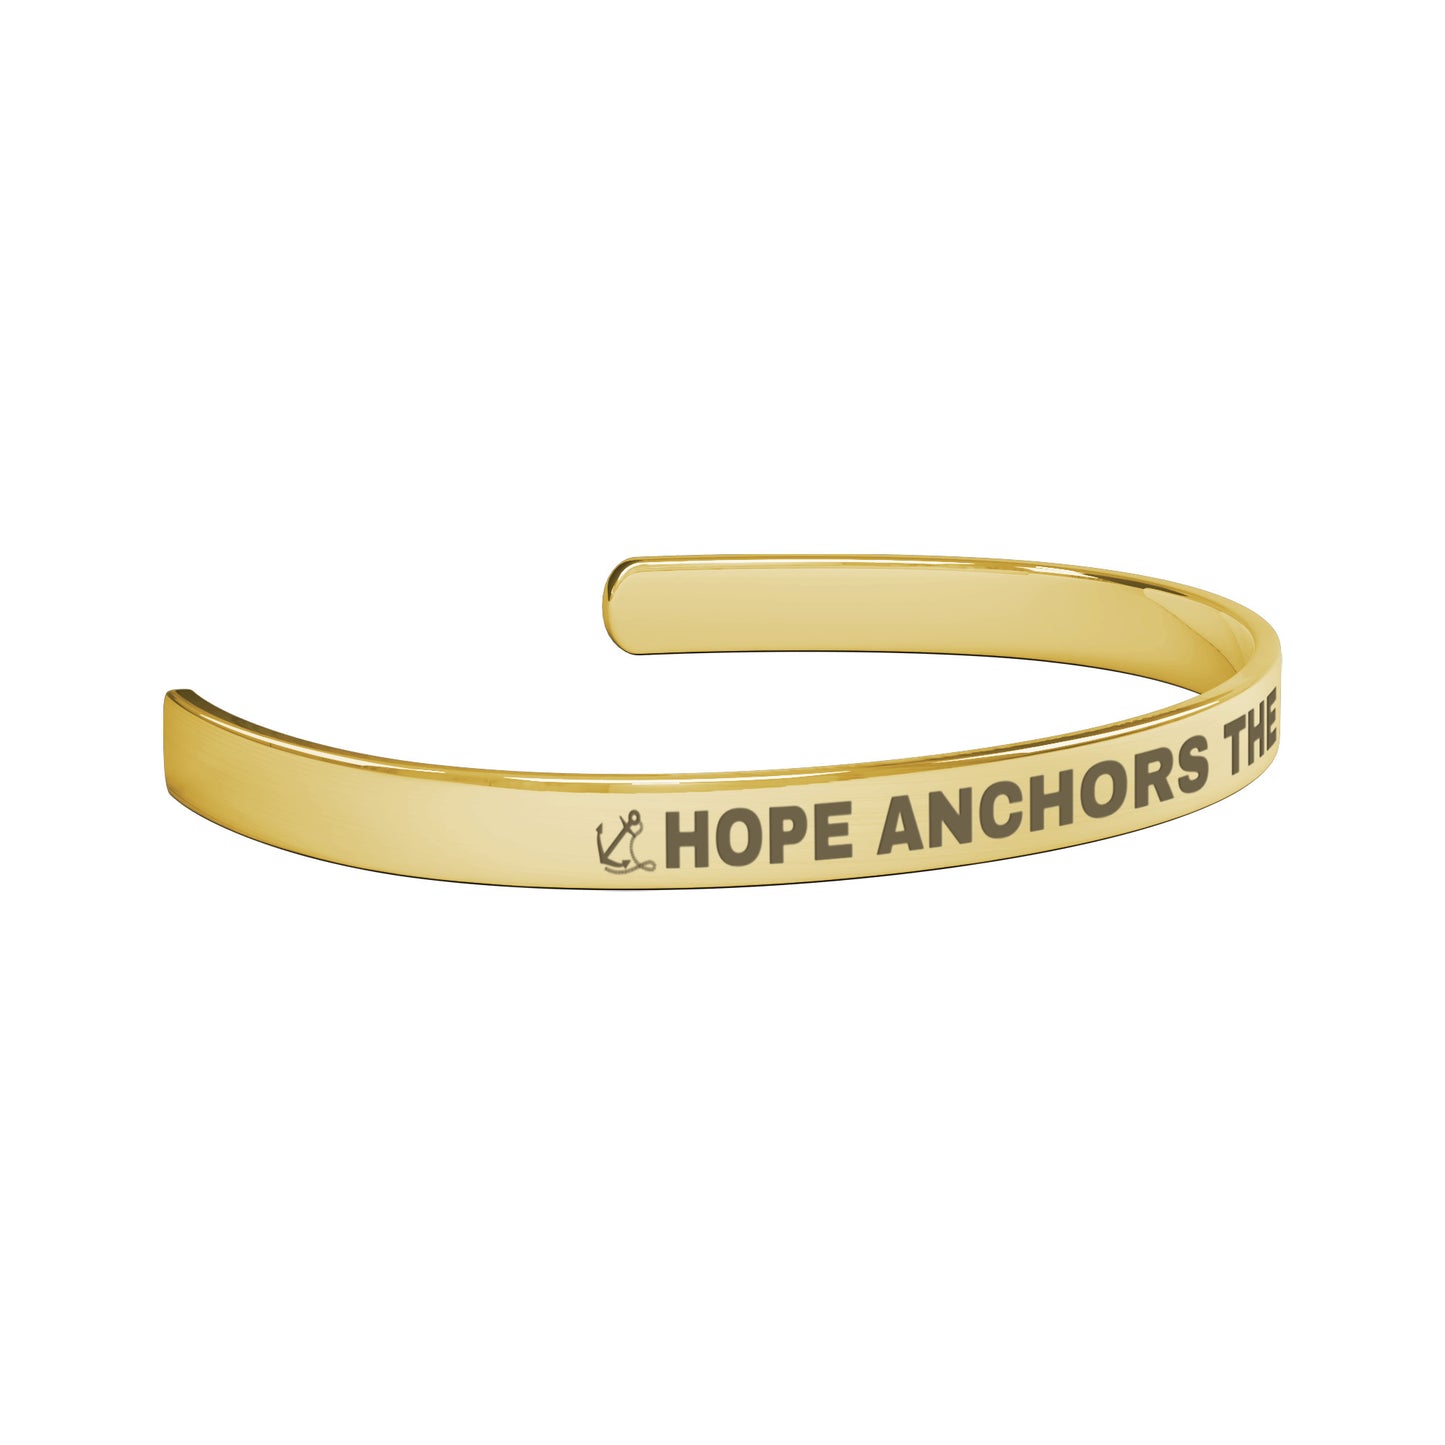 HOPE ANCHORS THE SOUL